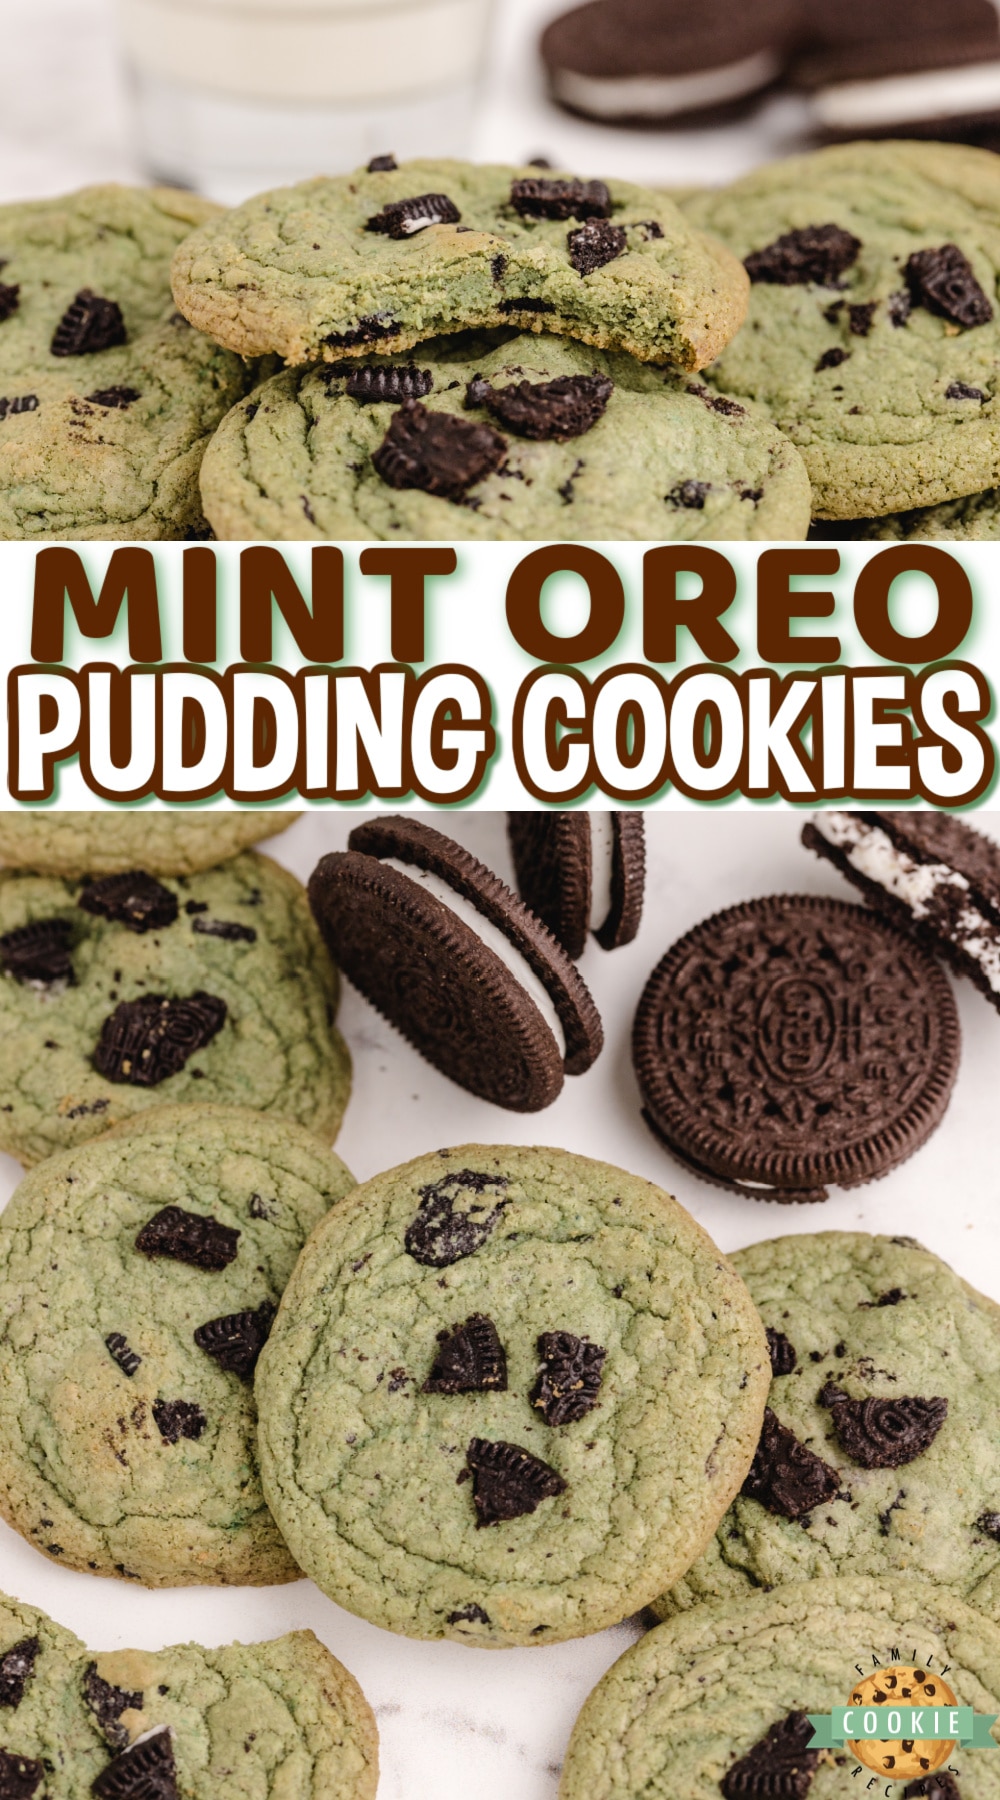 Mint Oreo Pudding Cookies are soft, chewy and full of mint flavor, Oreo pudding mix and crumbled Oreo cookies! The mint and chocolate flavor combination is a winner in these amazing cookies! via @buttergirls